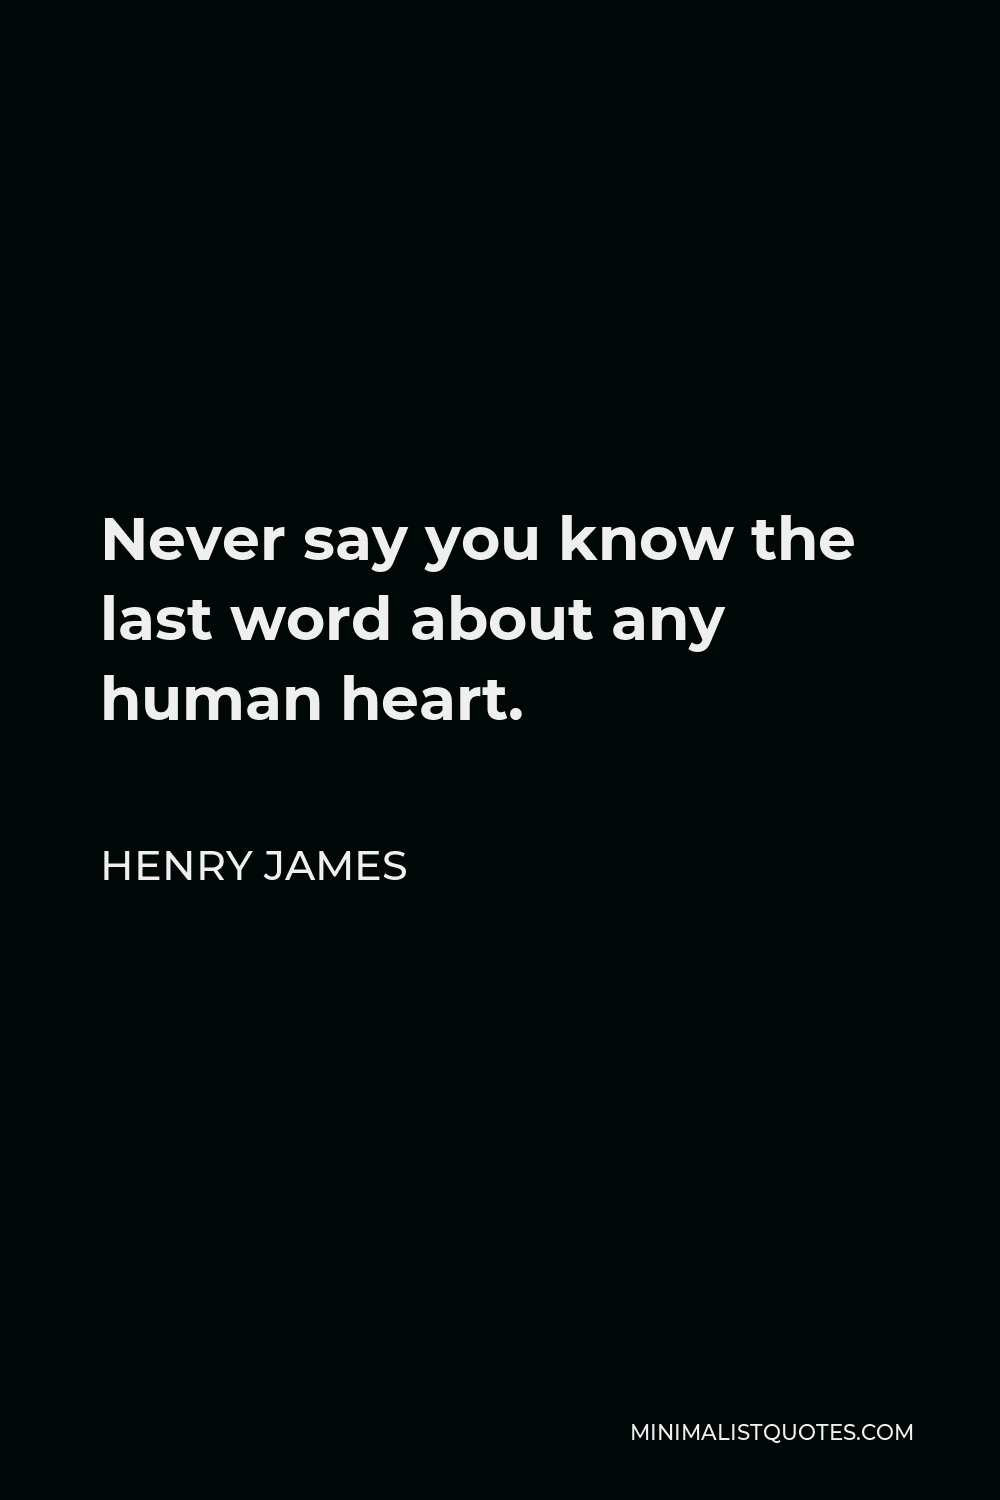 Henry James Quote - Never say you know the last word about any human heart.